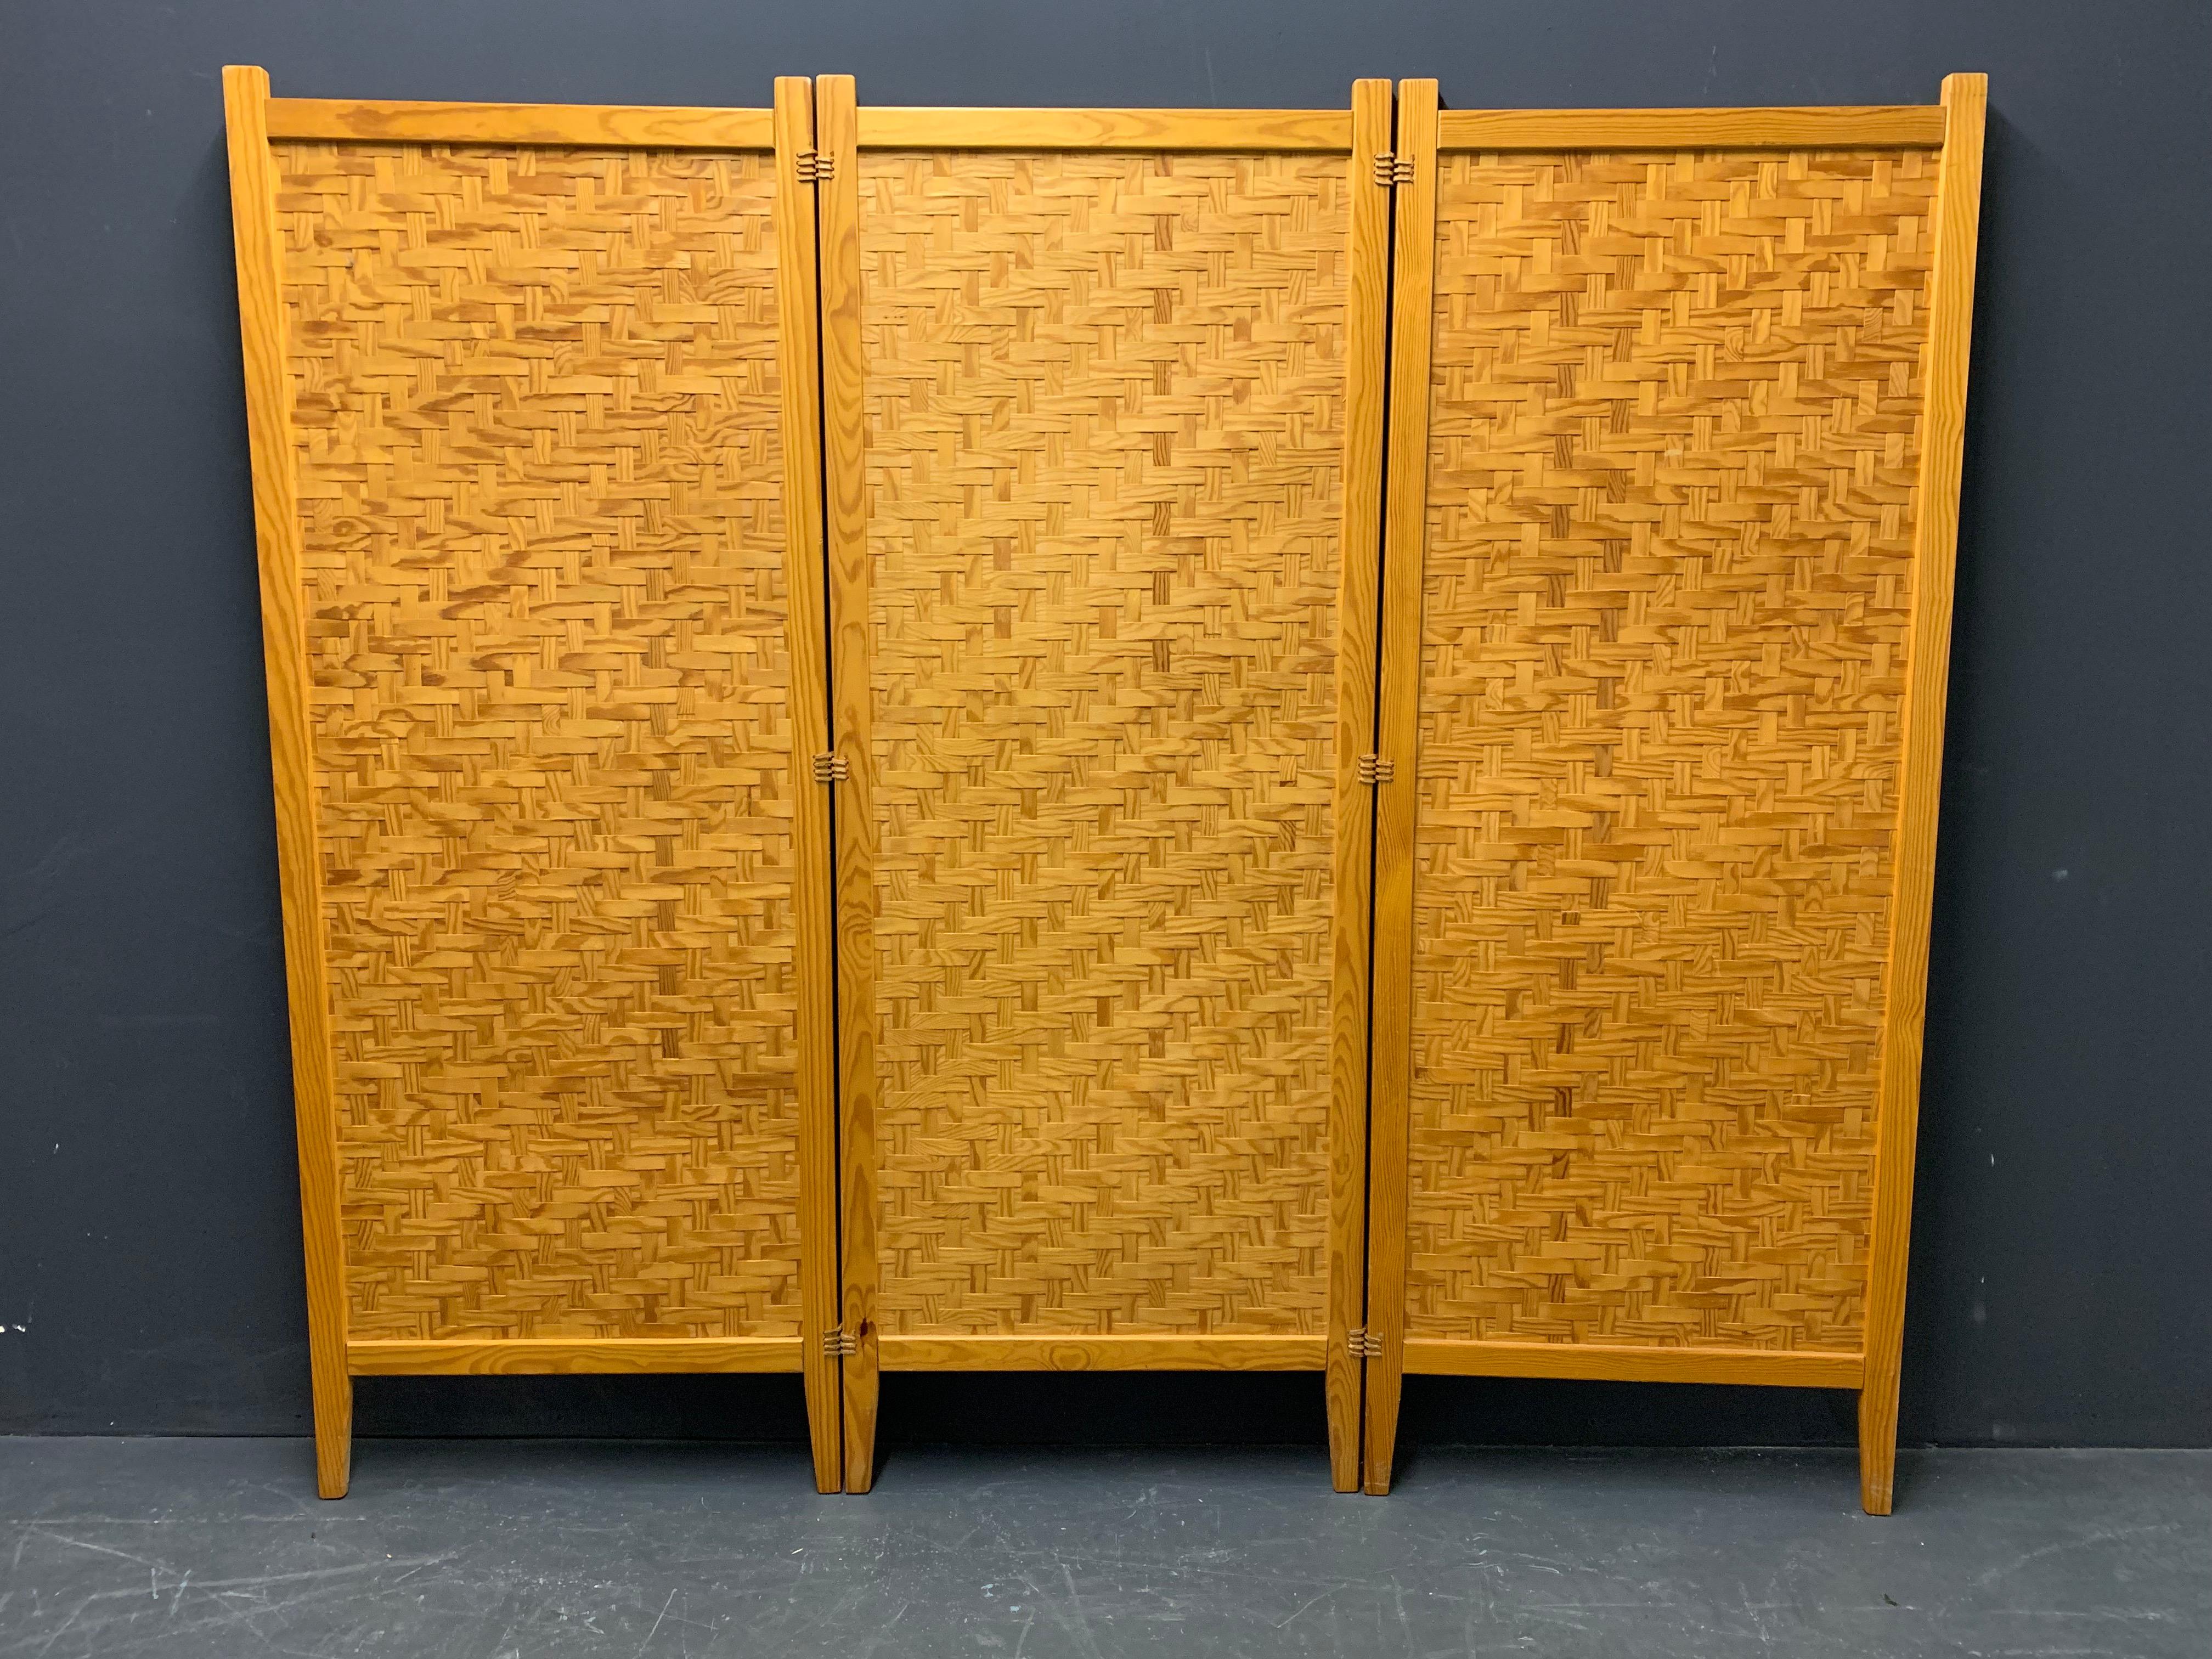 Made from woven pine stripes in massive wooden frames connected with leather.

 